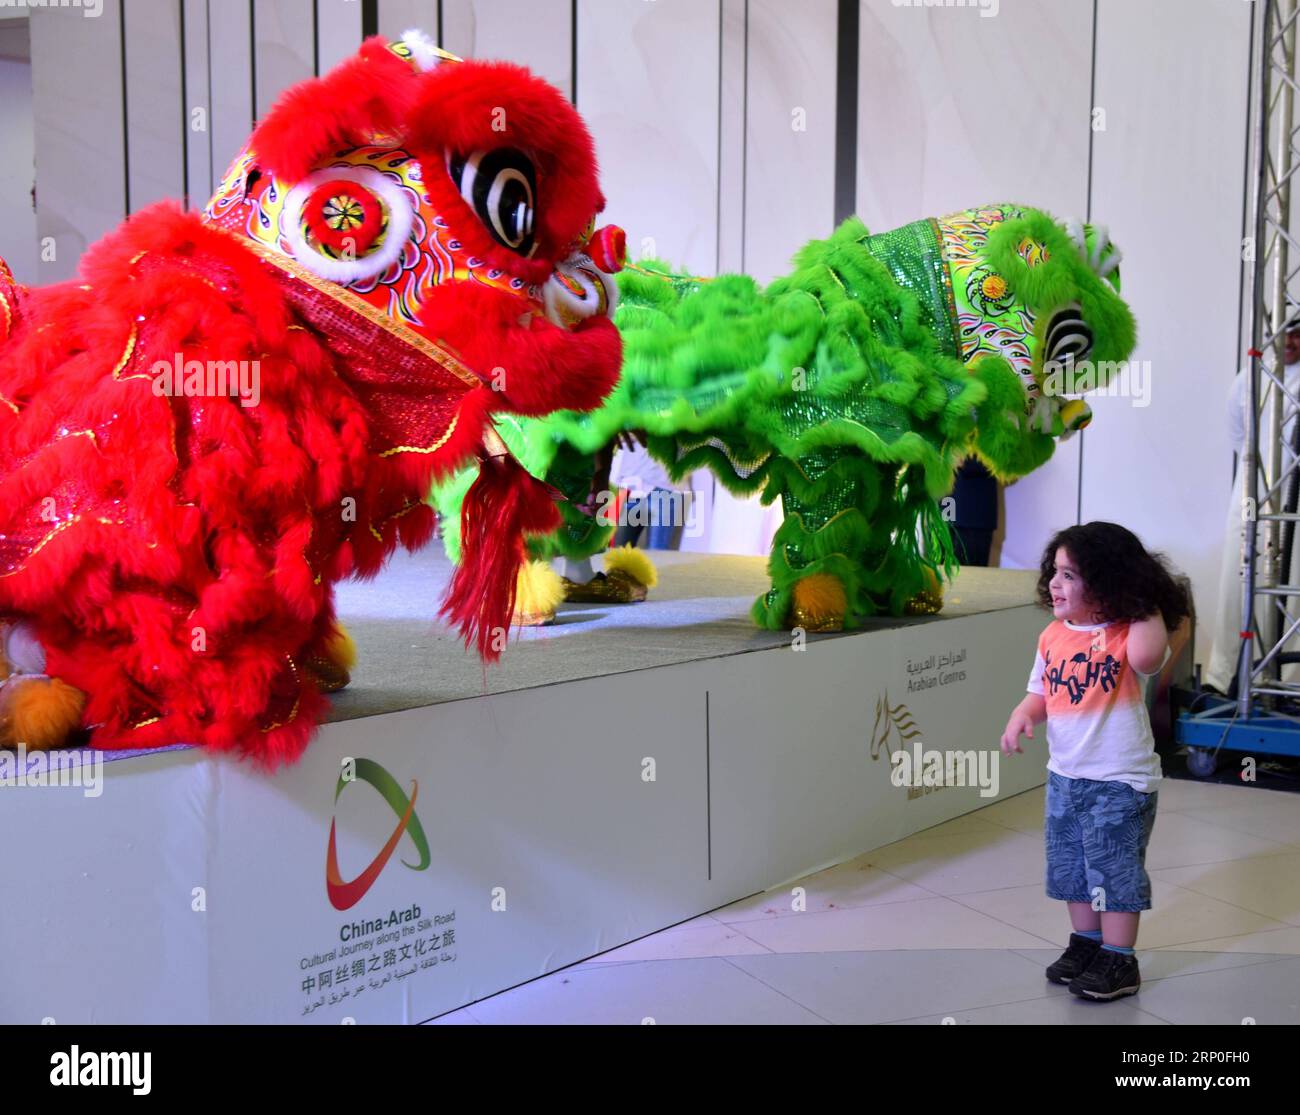 (180512) -- DAMMAM, May 12, 2018 -- Chinese actors perform at a shopping mall in Dammam, Saudi Arabia on May 11, 2018. A Chinese arts delegation for dragon and lion dance and martial arts is giving performances in two big cities in Saudi Arabia. The performances which started on May 8 will last until May 12. ) (srb) SAUDI ARABIA-DAMMAM-CHINA-CULTURE-SHOW WangxBo PUBLICATIONxNOTxINxCHN Stock Photo